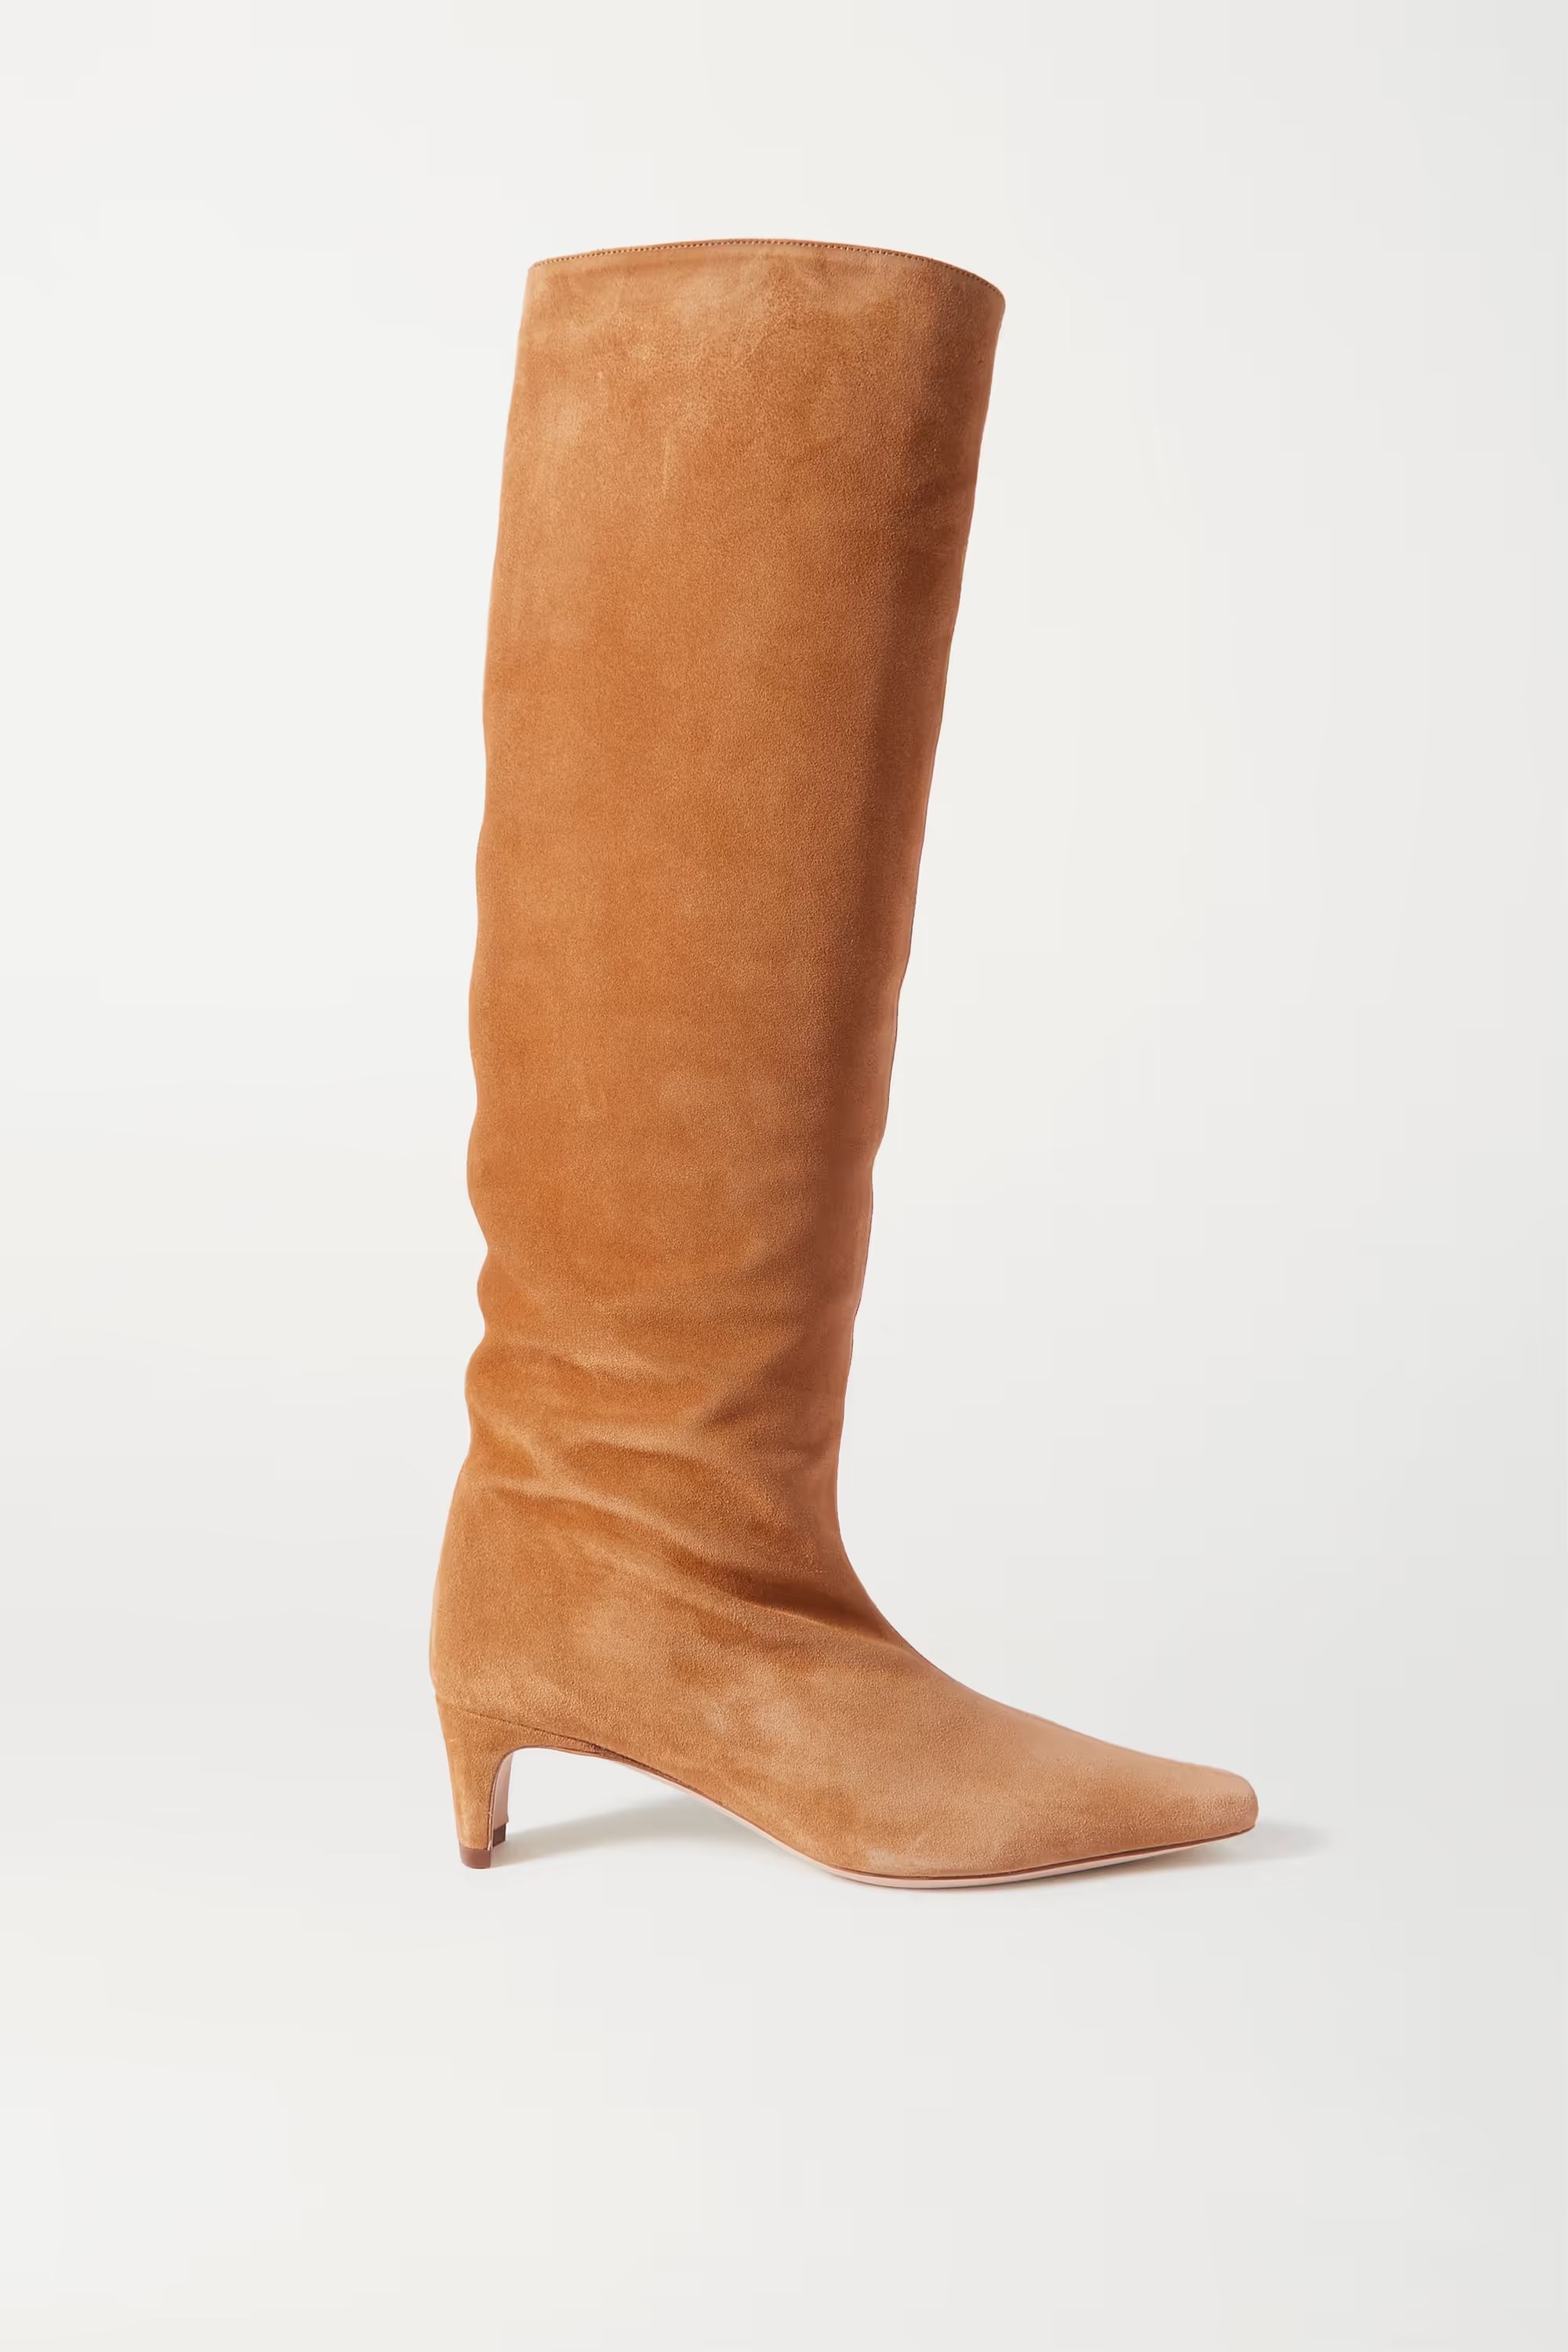 Wally suede knee boots | NET-A-PORTER (US)